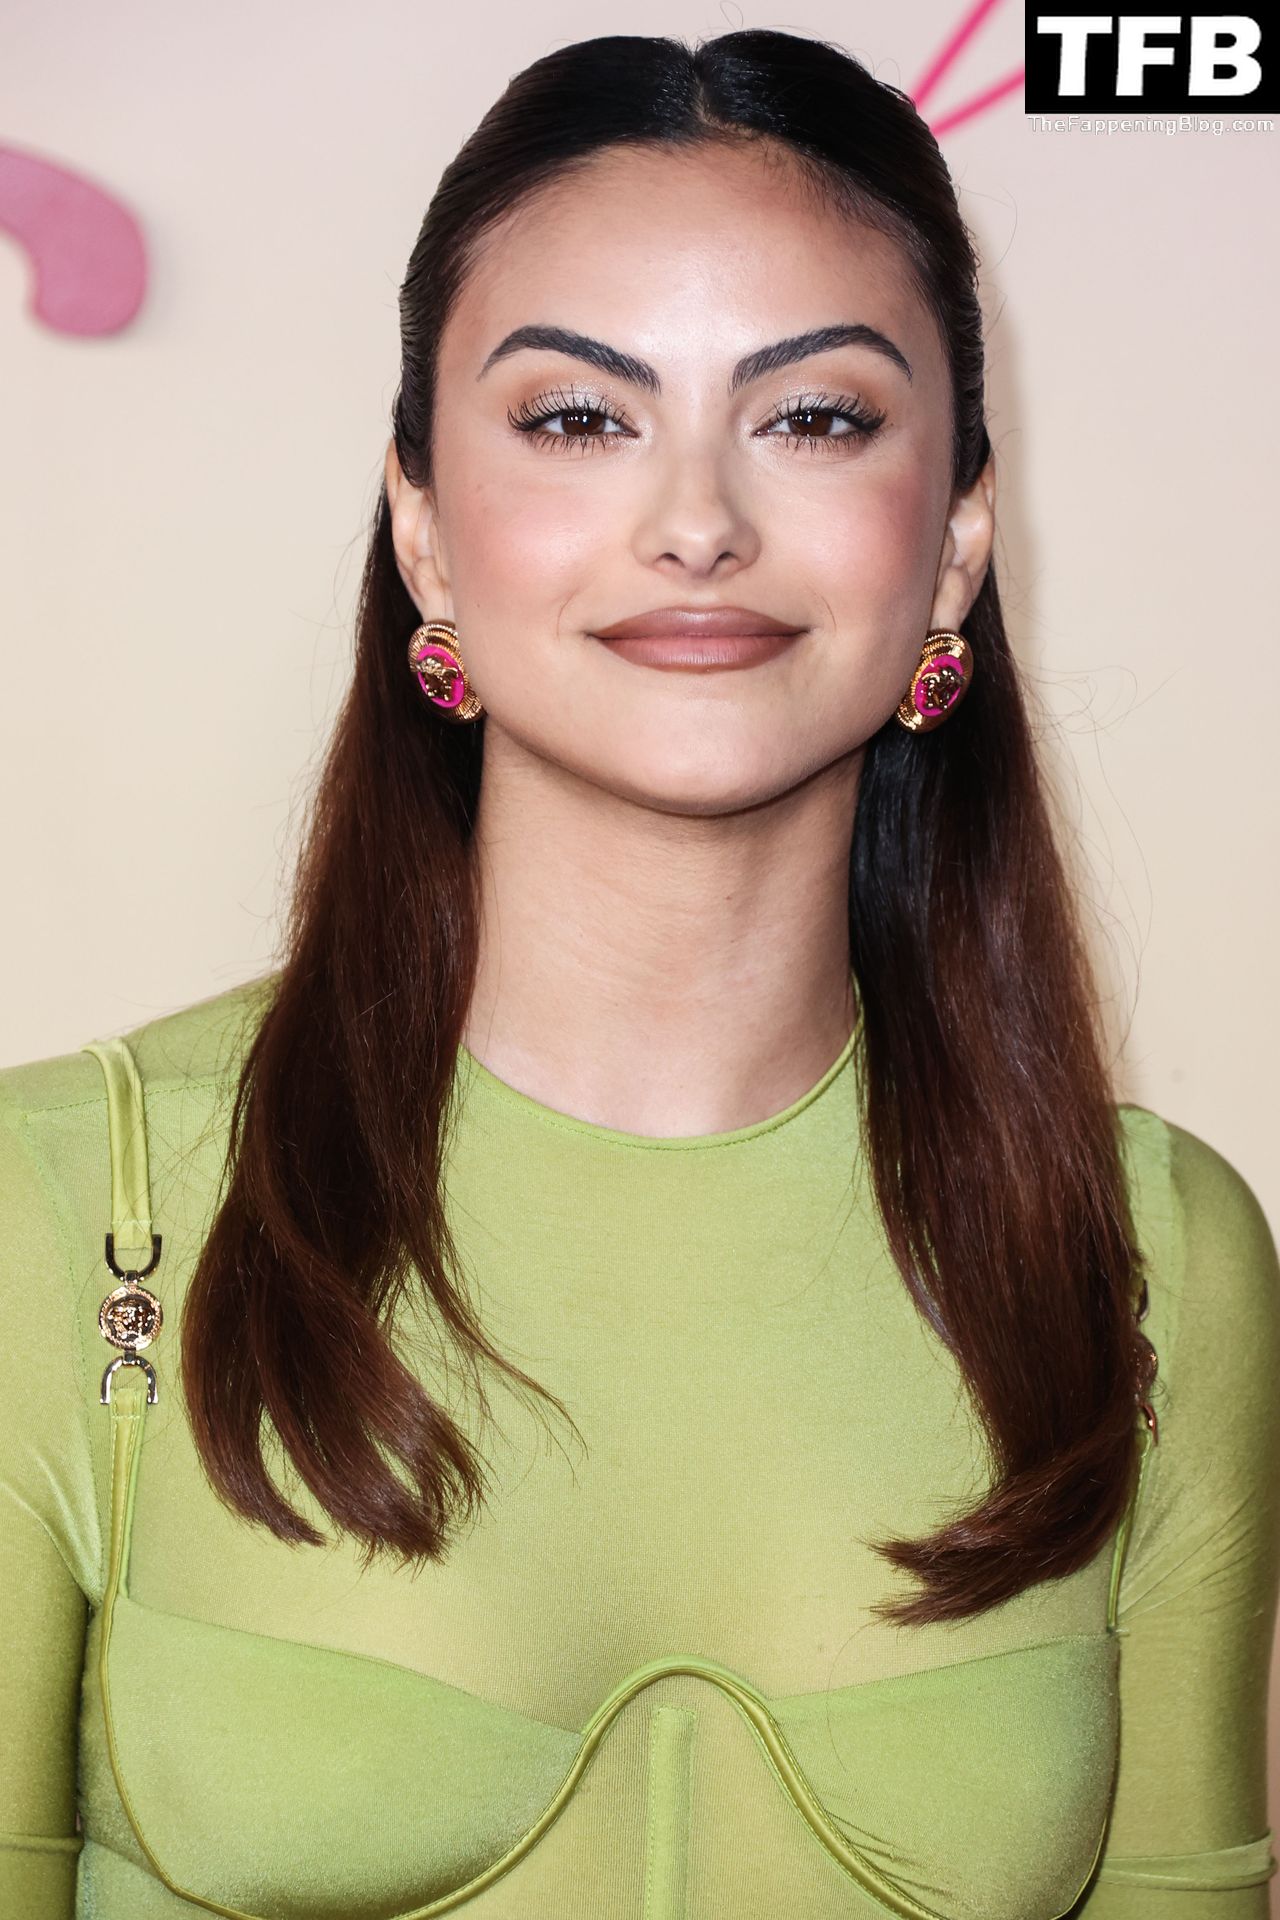 Camila-Mendes-Sexy-The-Fappening-Blog-18-1.jpg